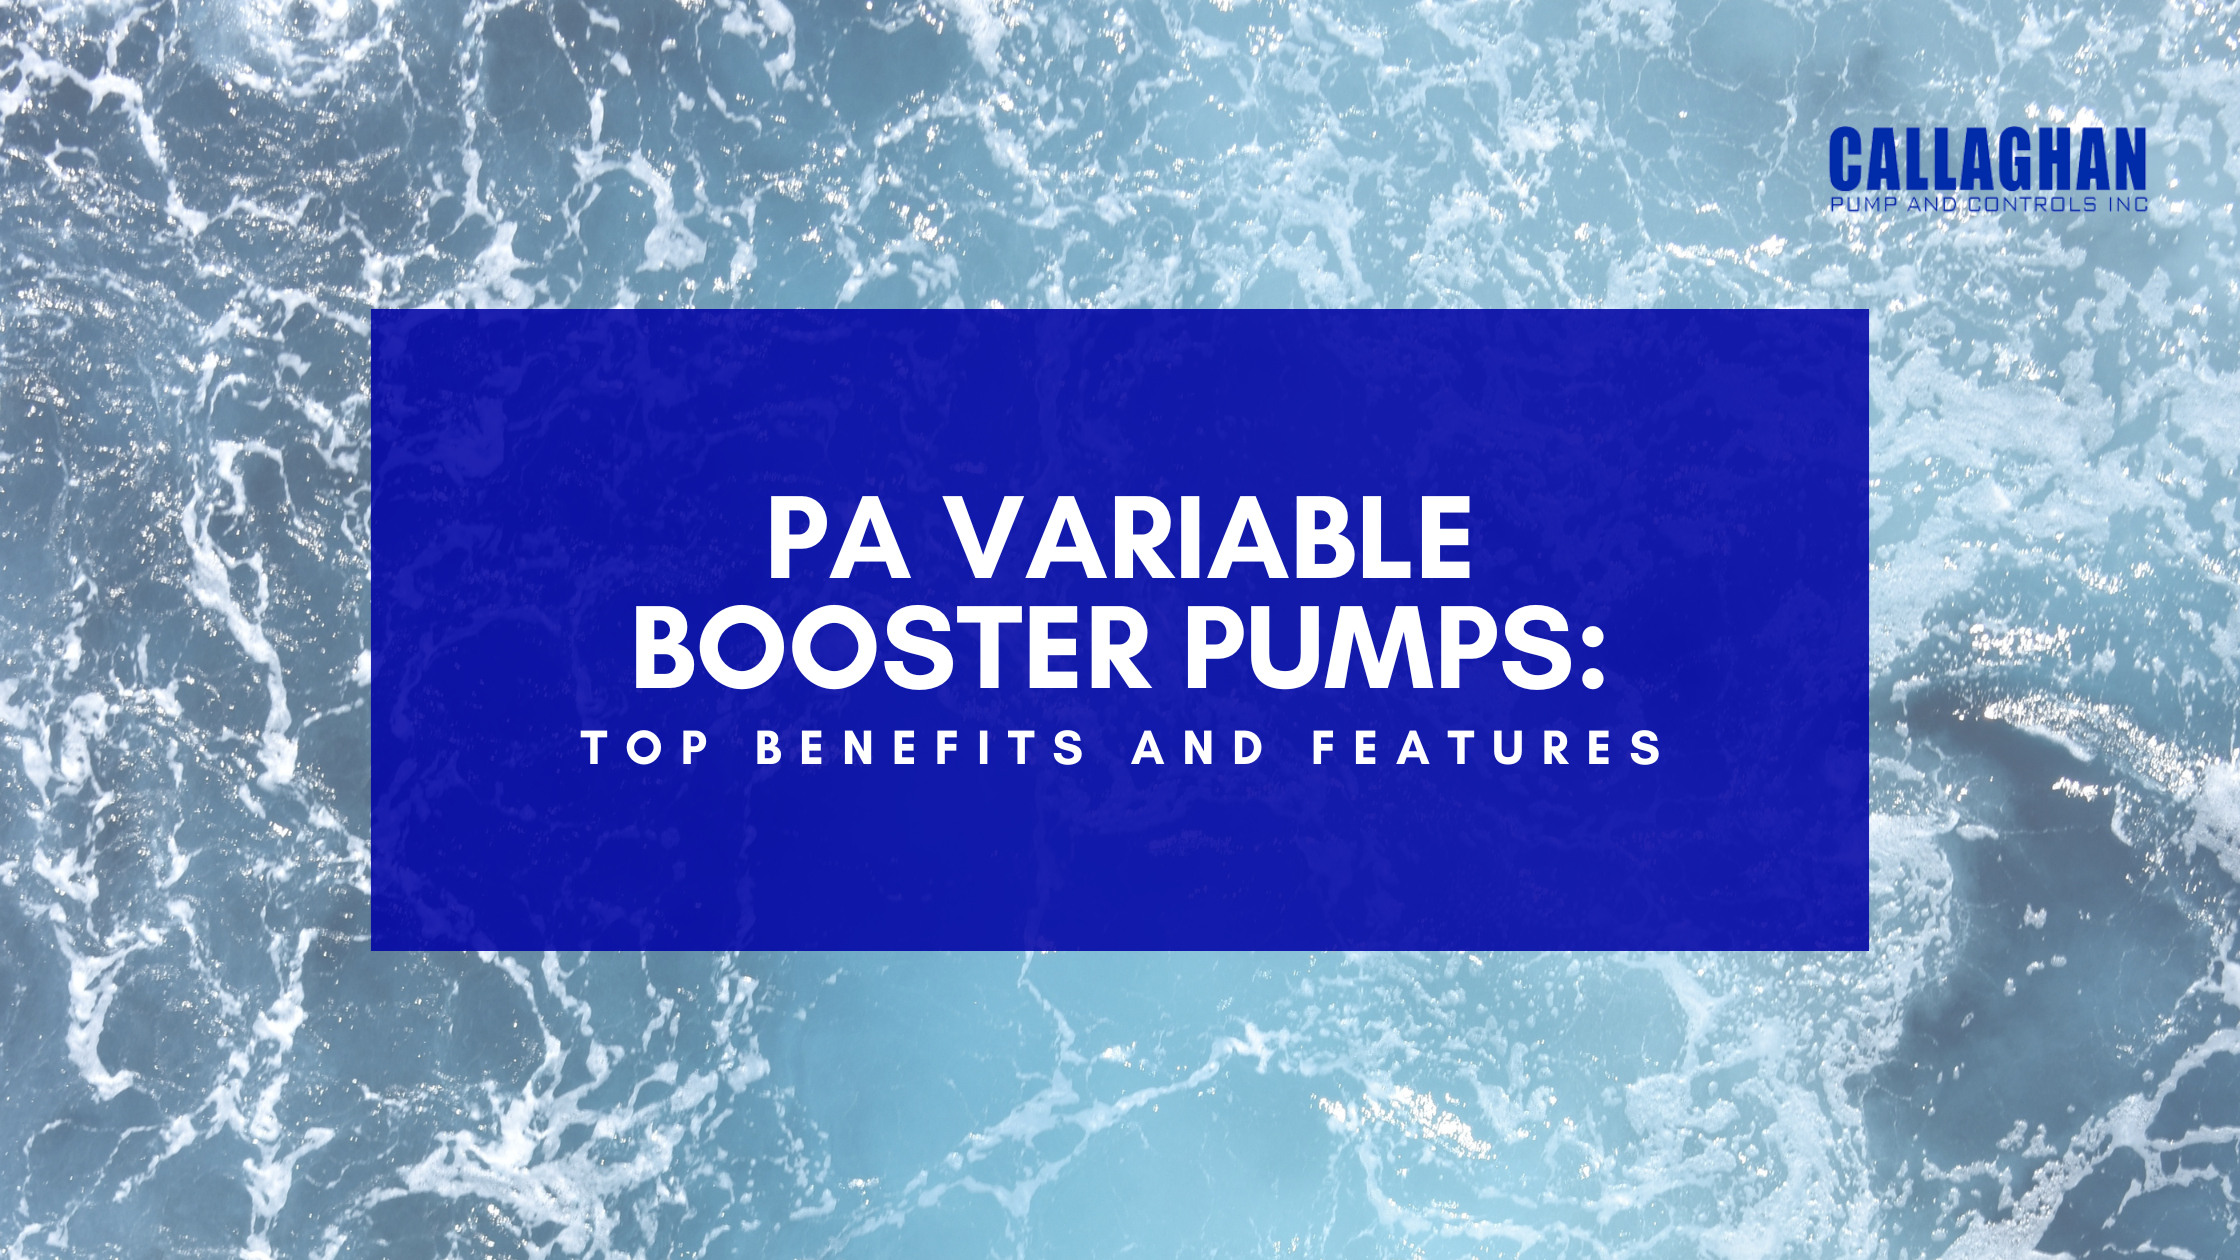 PA variable boosterpumps